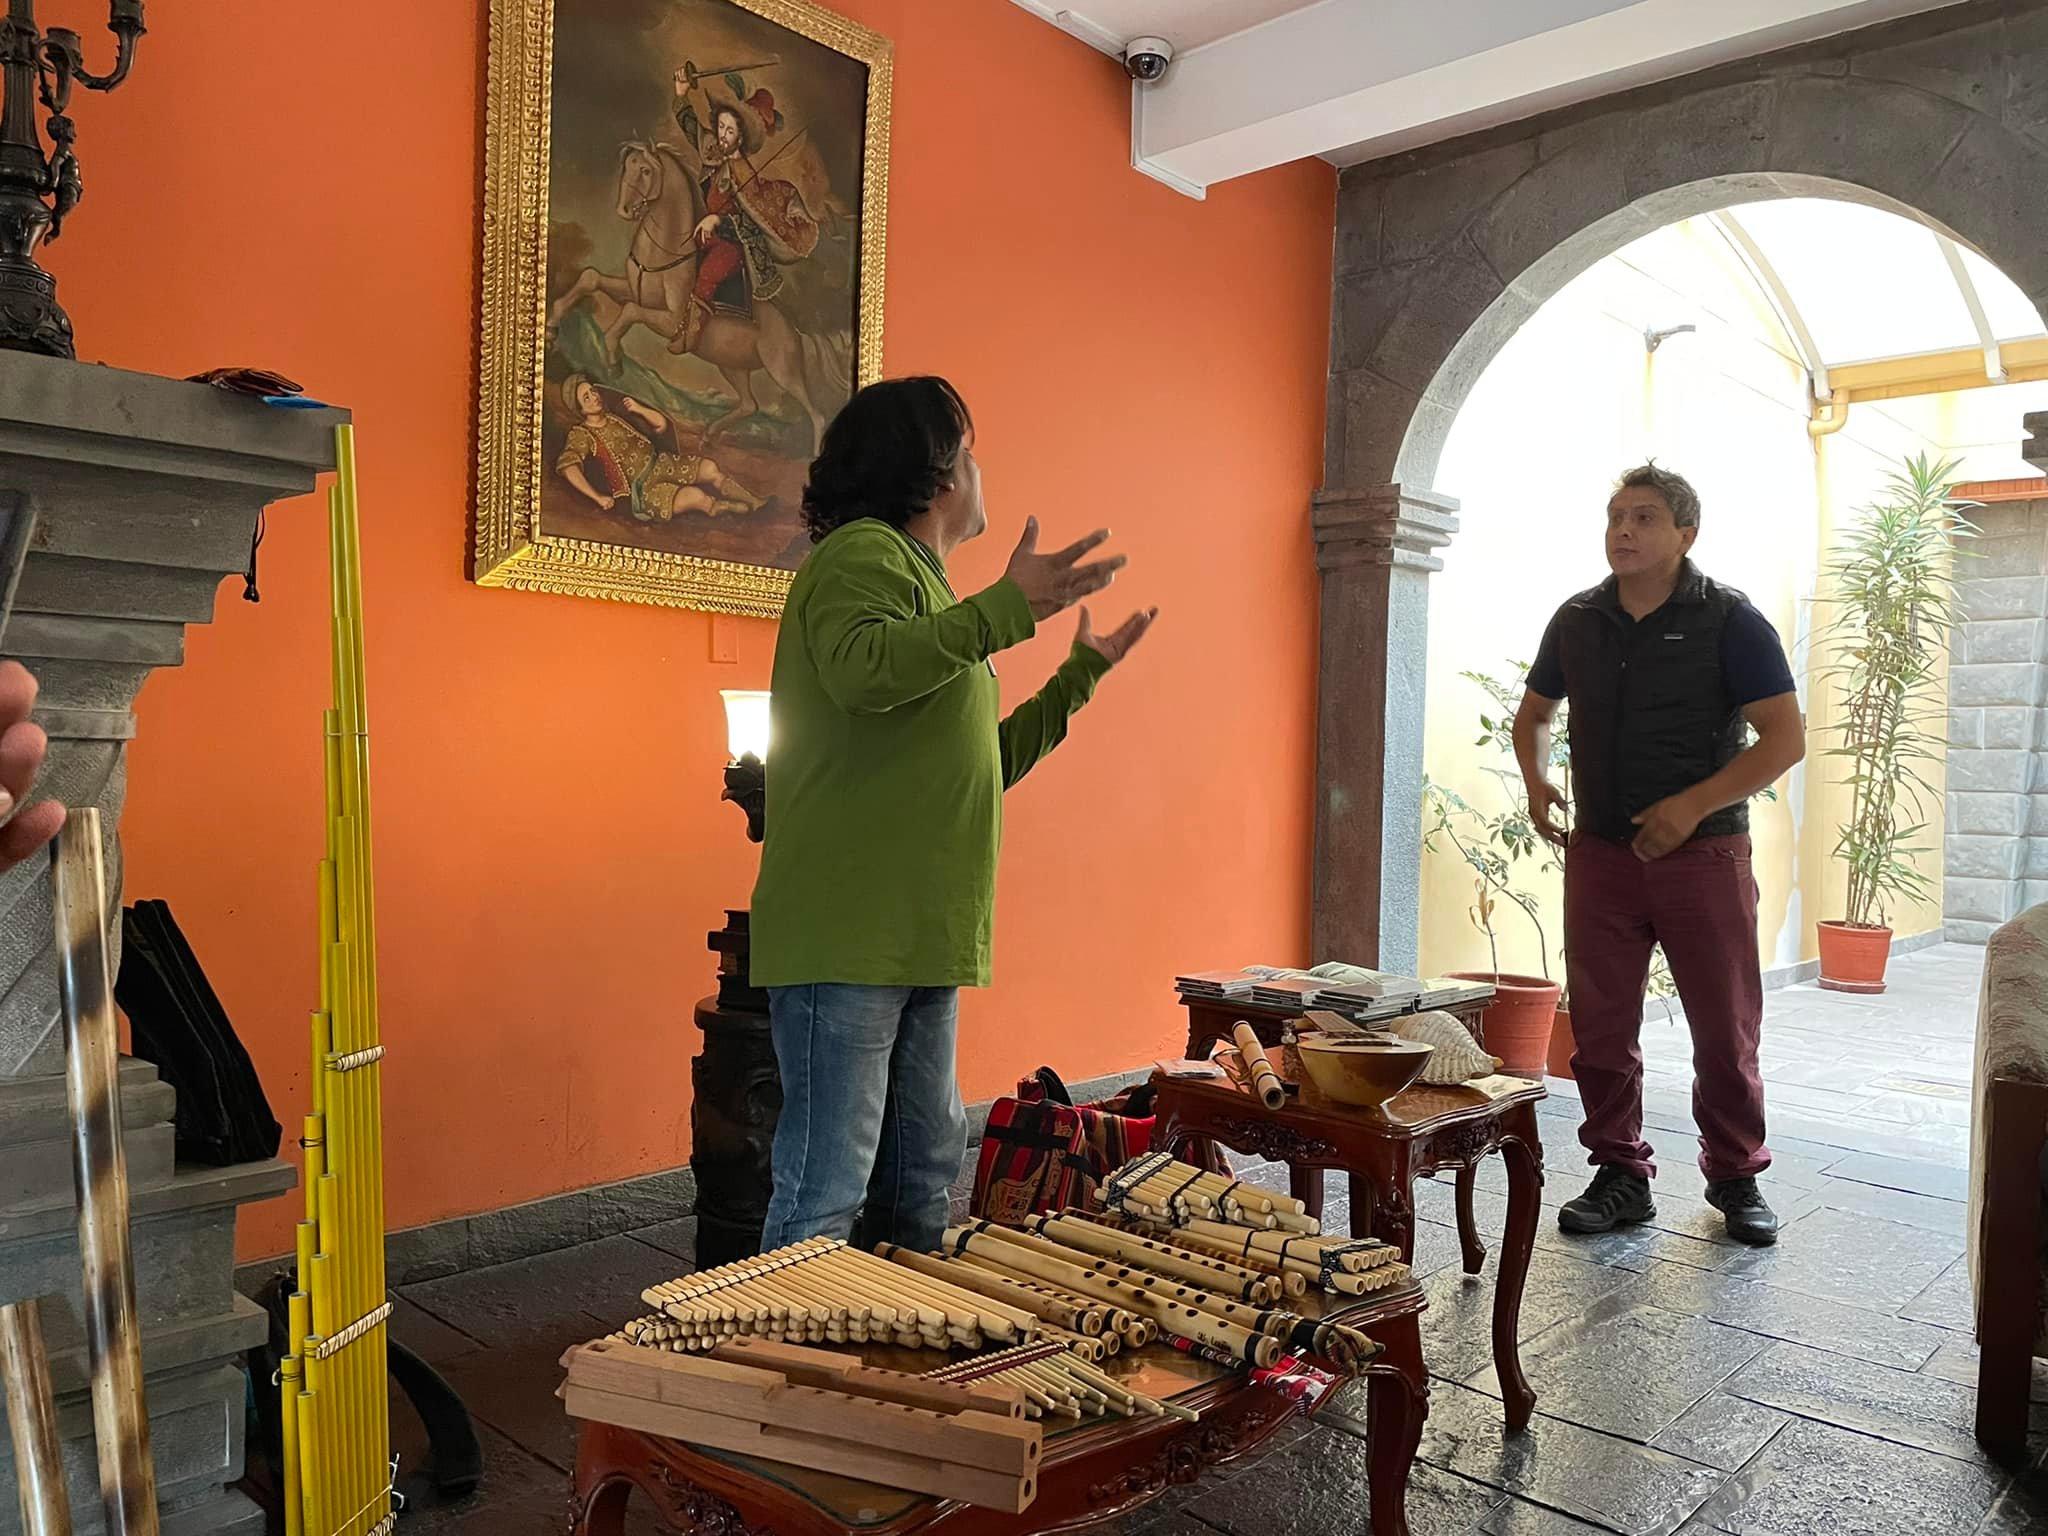 Pictures of Peru 4/4: Image of a musician in front of a table of musical instruments